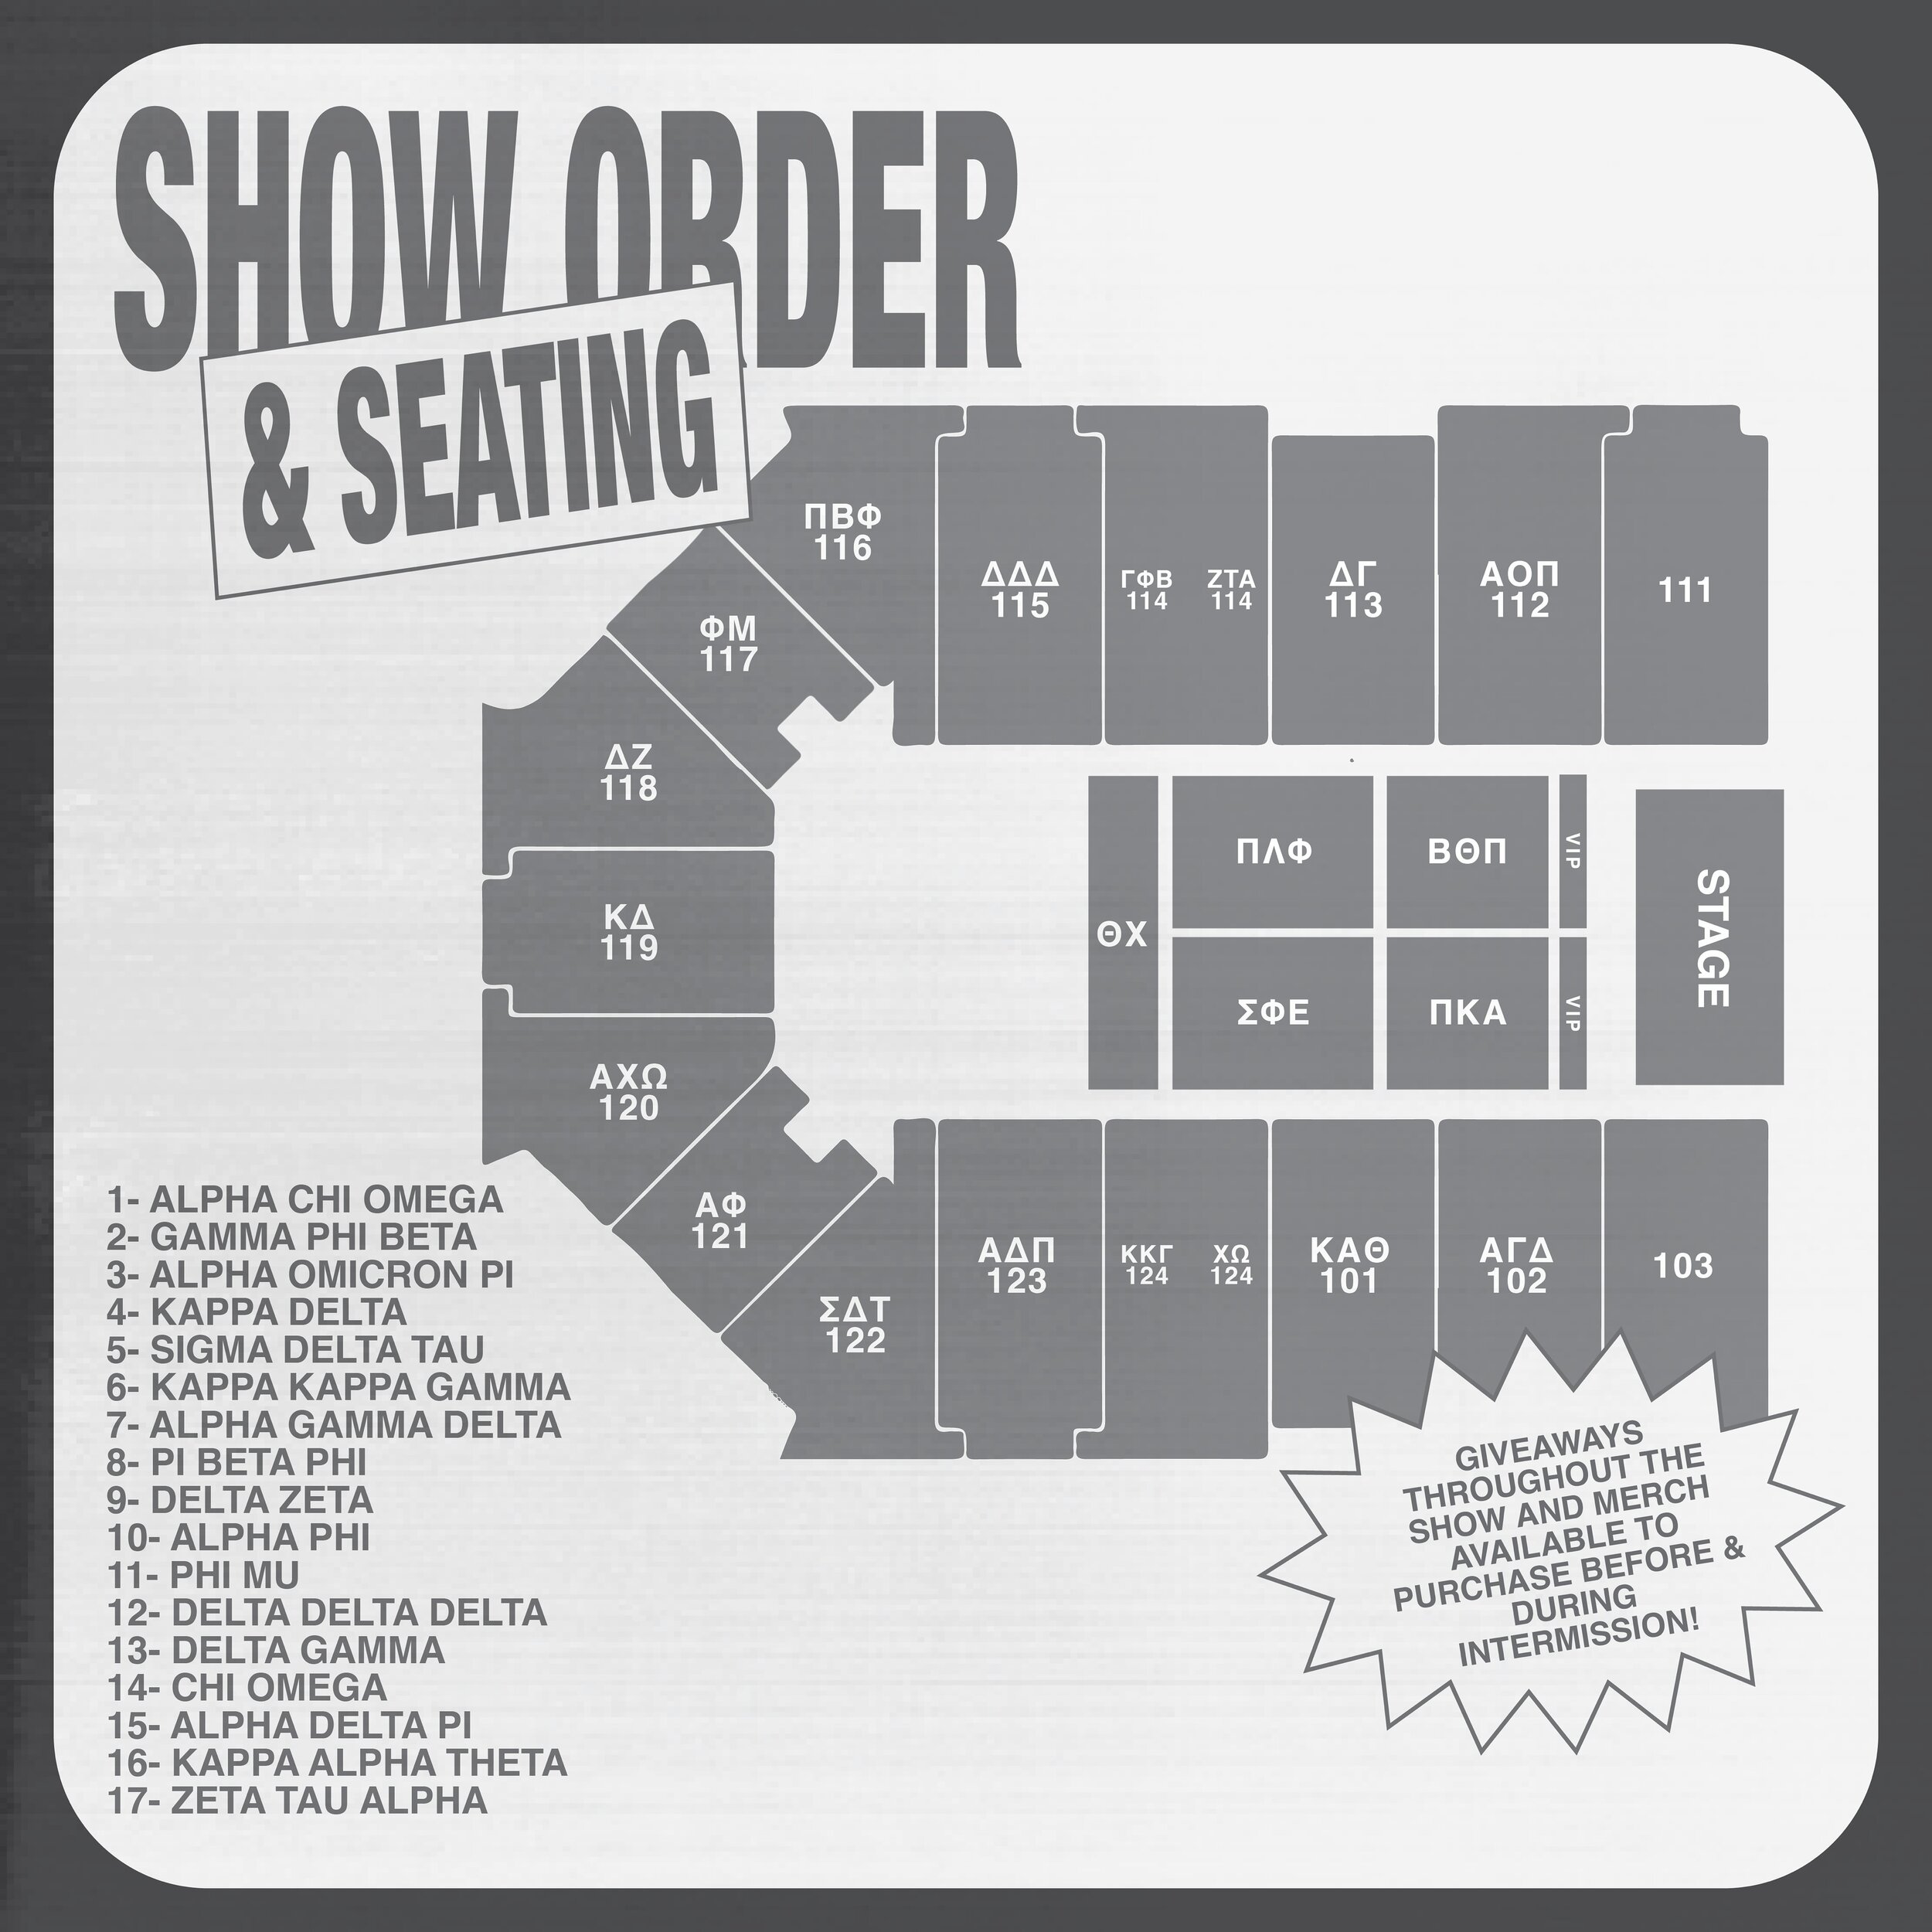 Here&rsquo;s a sneak peek at the show order and seating for tomorrow! We can&rsquo;t wait to see everyone tomorrow at the Civic Center! Doors open at 5:30PM and the show begins at 6:30PM! Concessions will be open and tickets are still available to pu